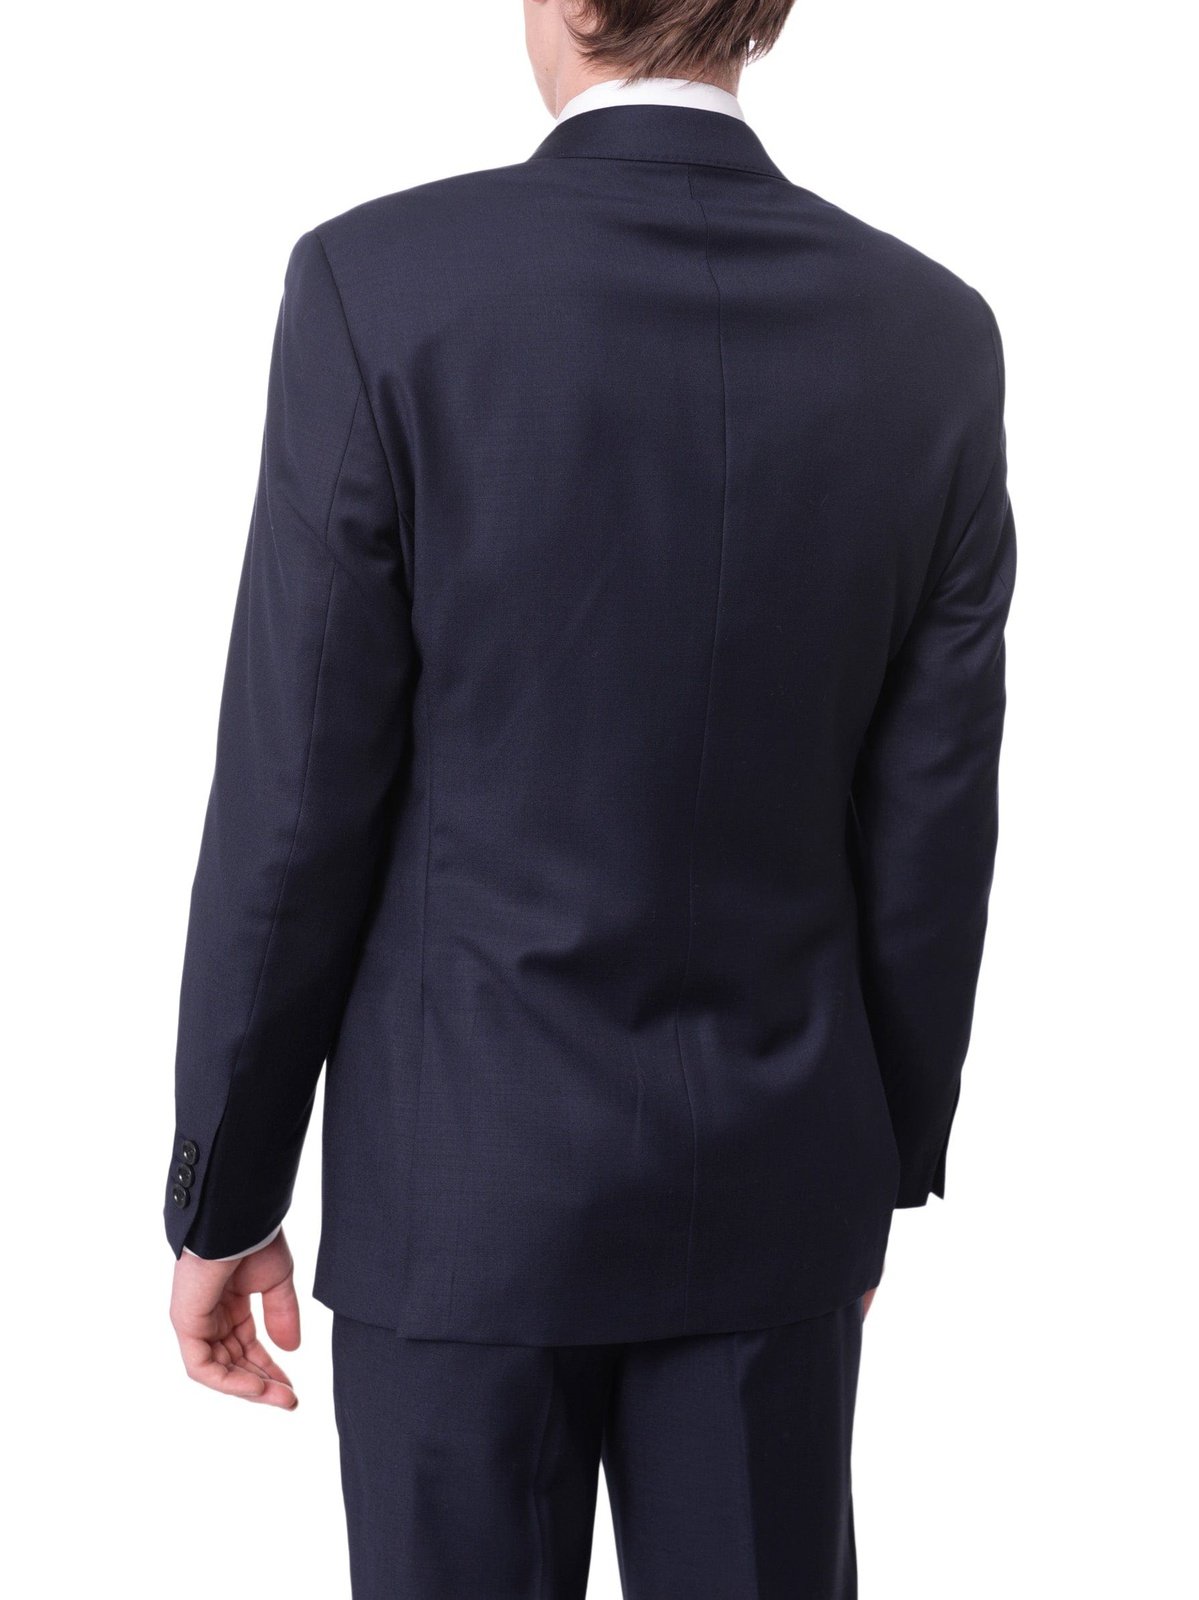 Label M Mens Extra Slim Fit Solid Navy Blue Two Button Wool Suit